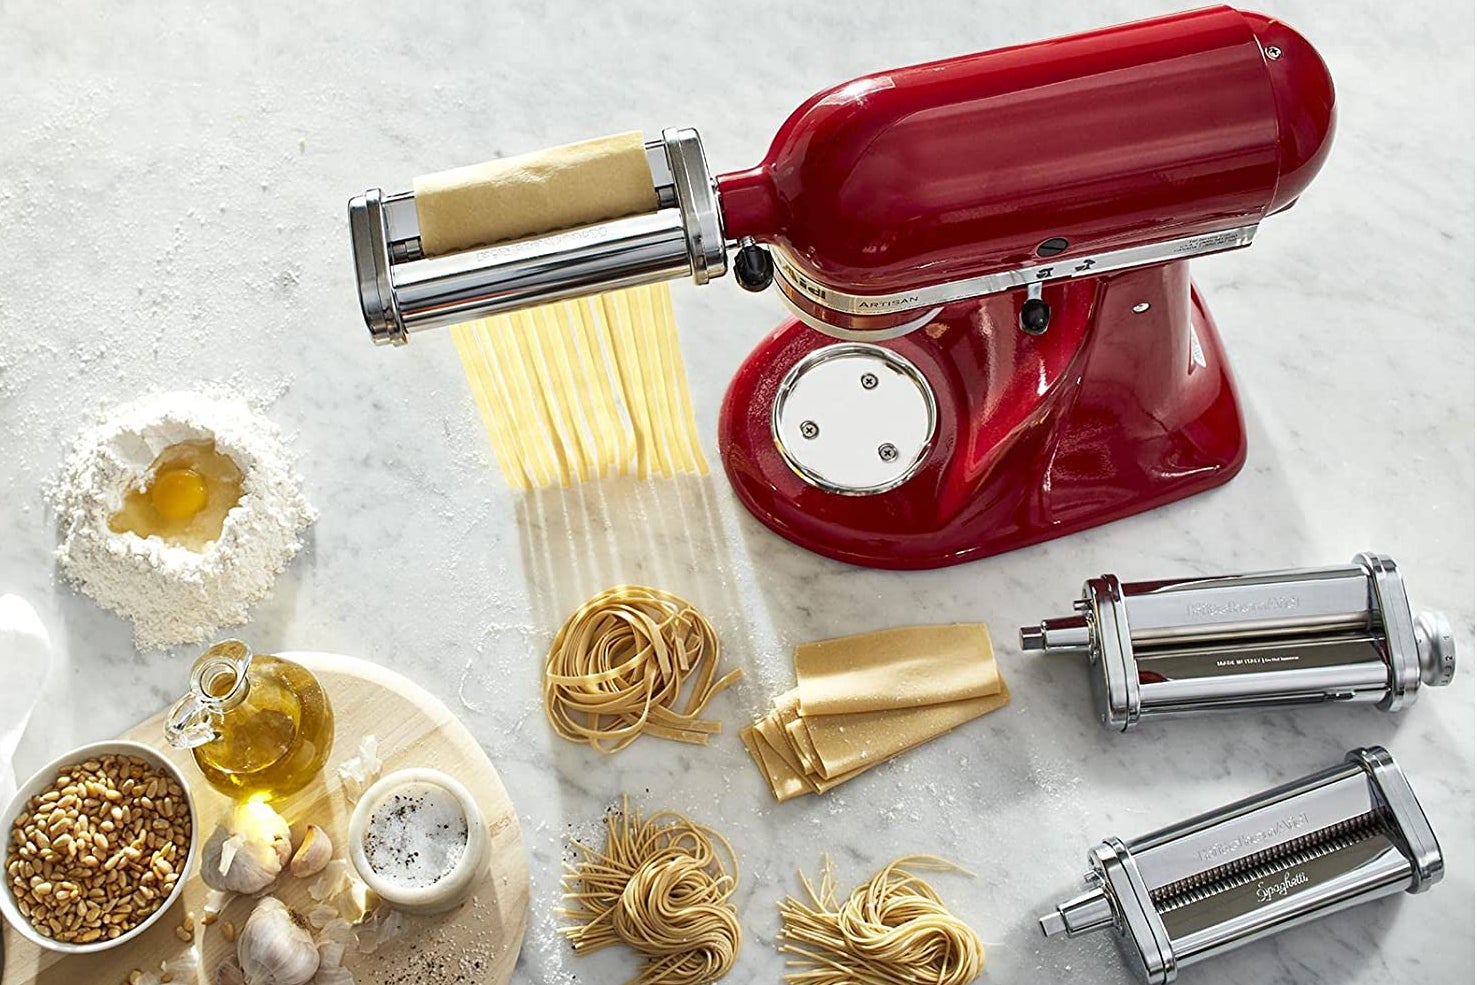 What Are the Best KitchenAid Mixer Attachments?